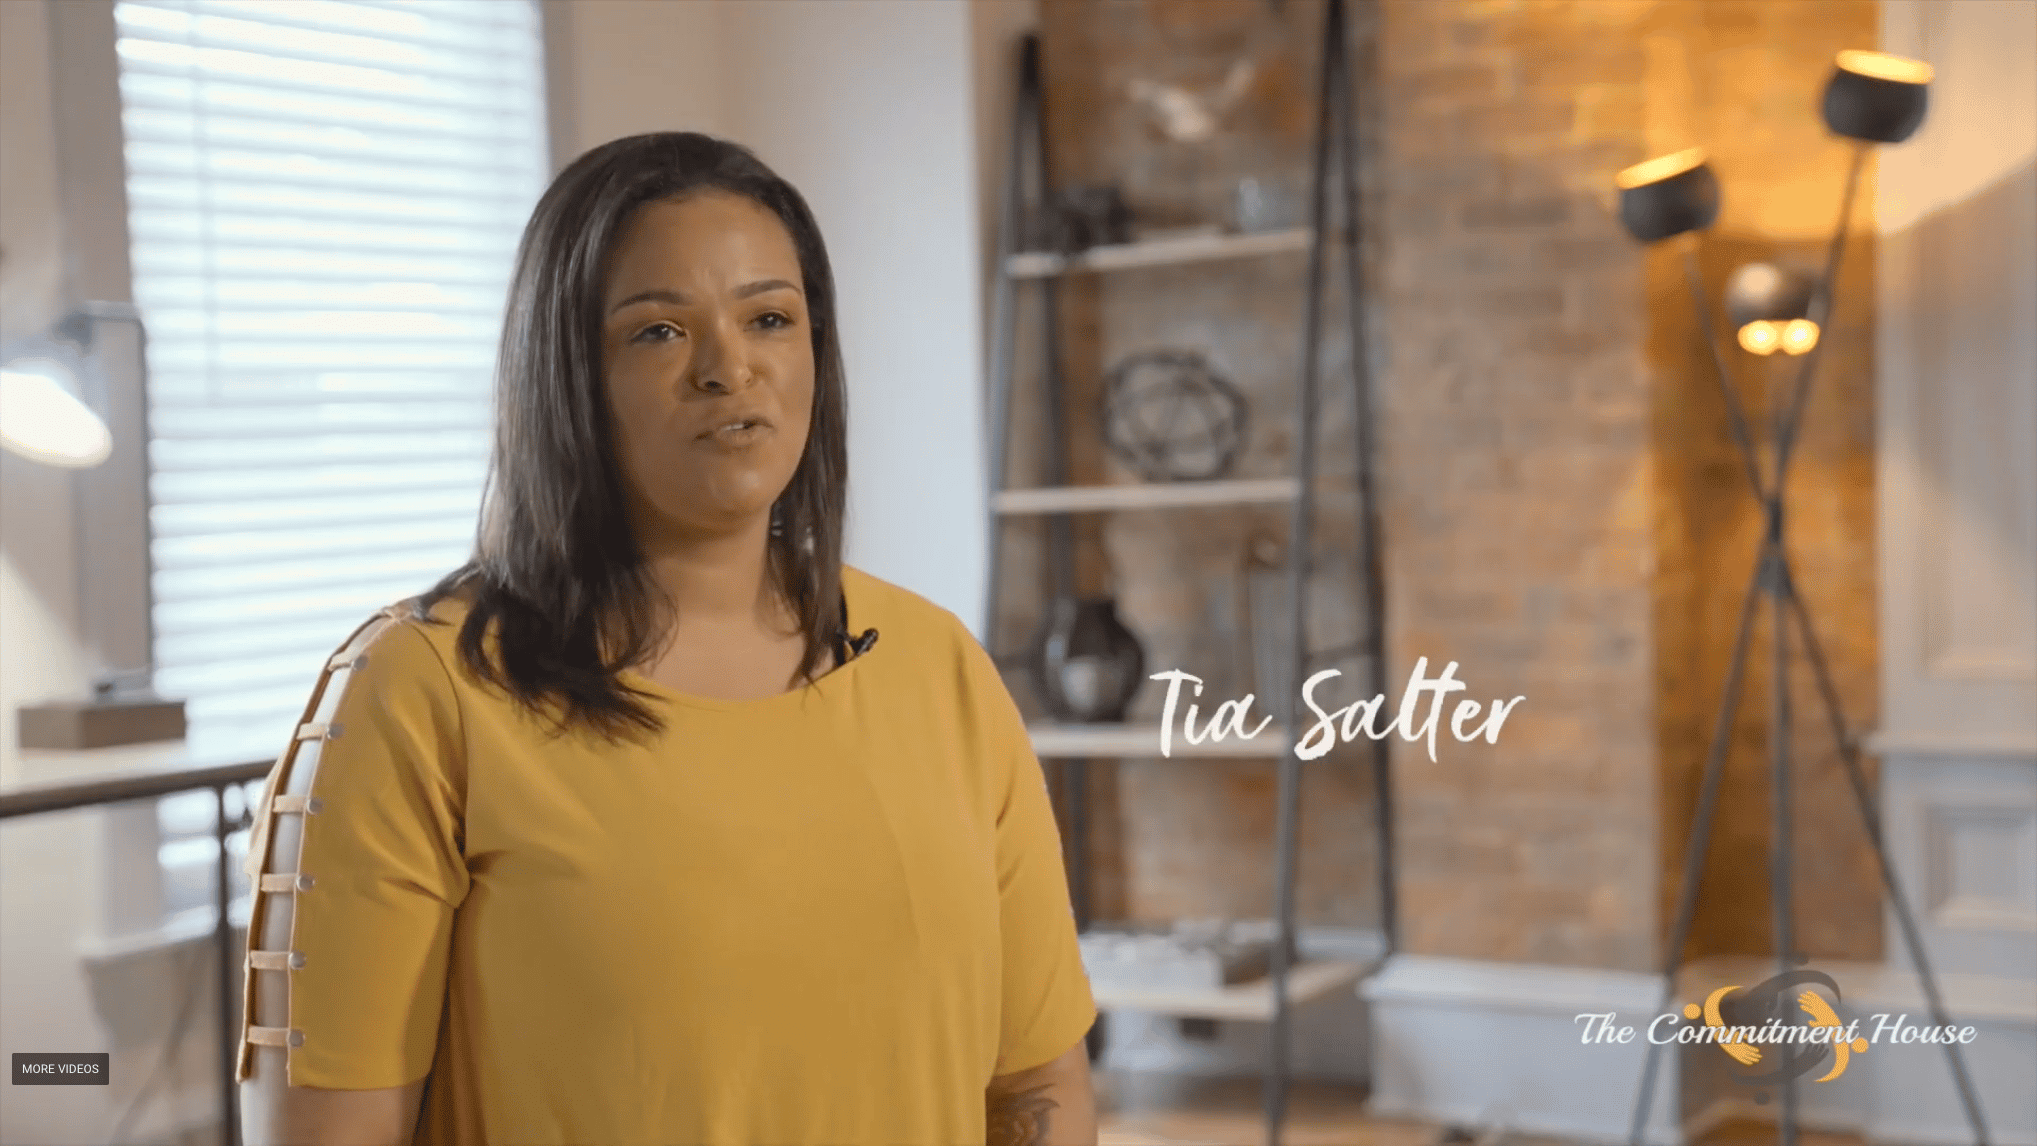 The Commitment House Tina Salter Video Cover